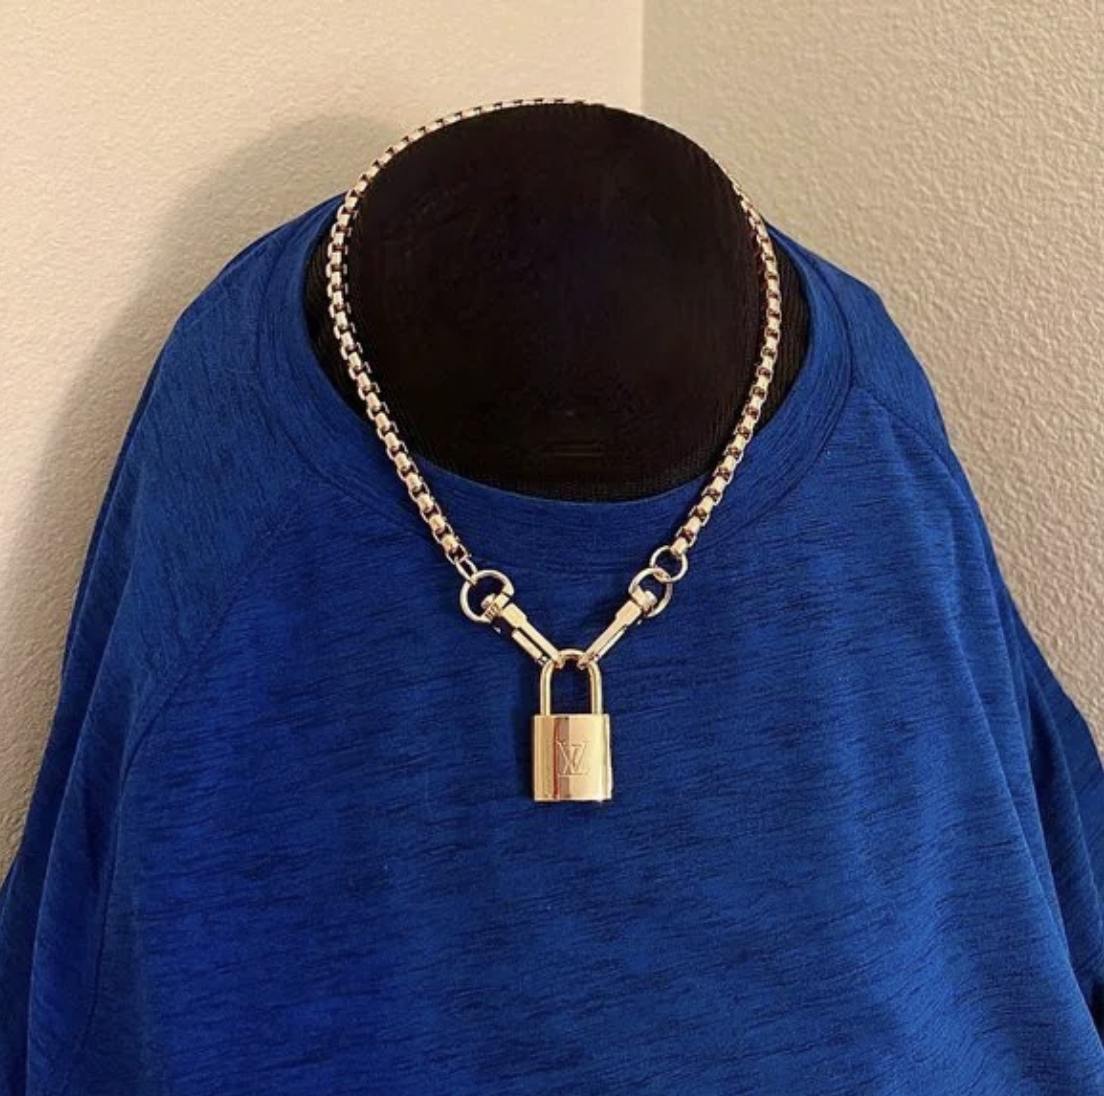 New Louis Vuitton Gold-Tone Lock with 18 Box Link Chain Necklace